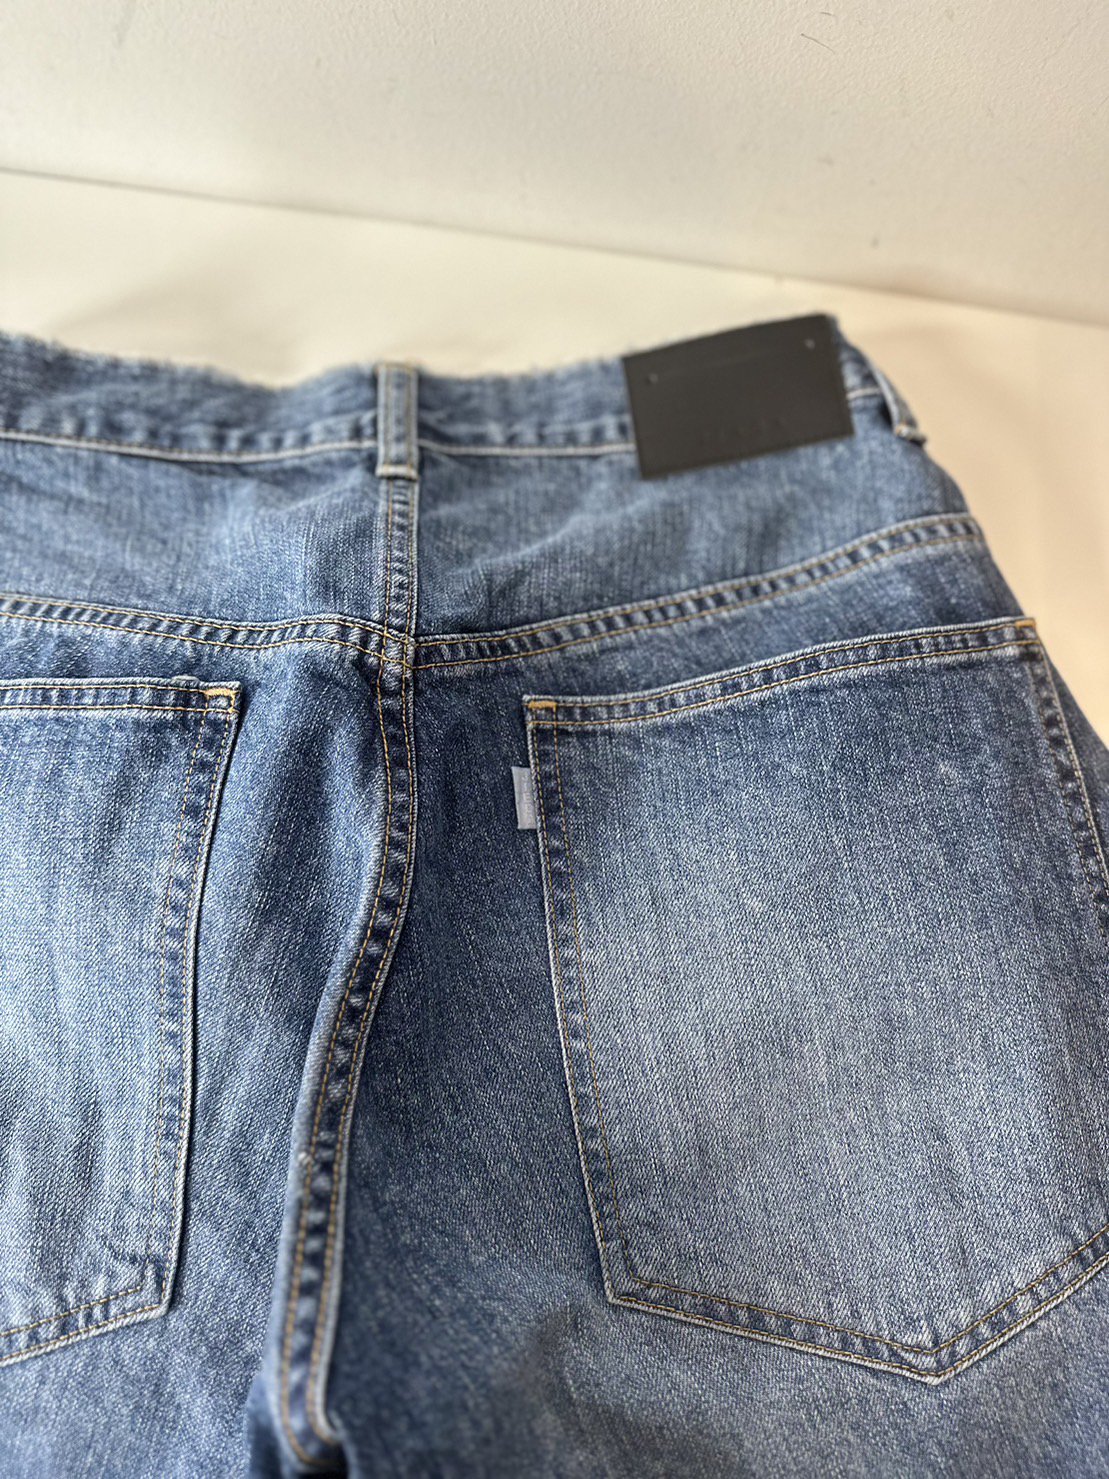 JieDa<br />USED 3D BAGGY DENIM / INDIGO<img class='new_mark_img2' src='https://img.shop-pro.jp/img/new/icons14.gif' style='border:none;display:inline;margin:0px;padding:0px;width:auto;' />